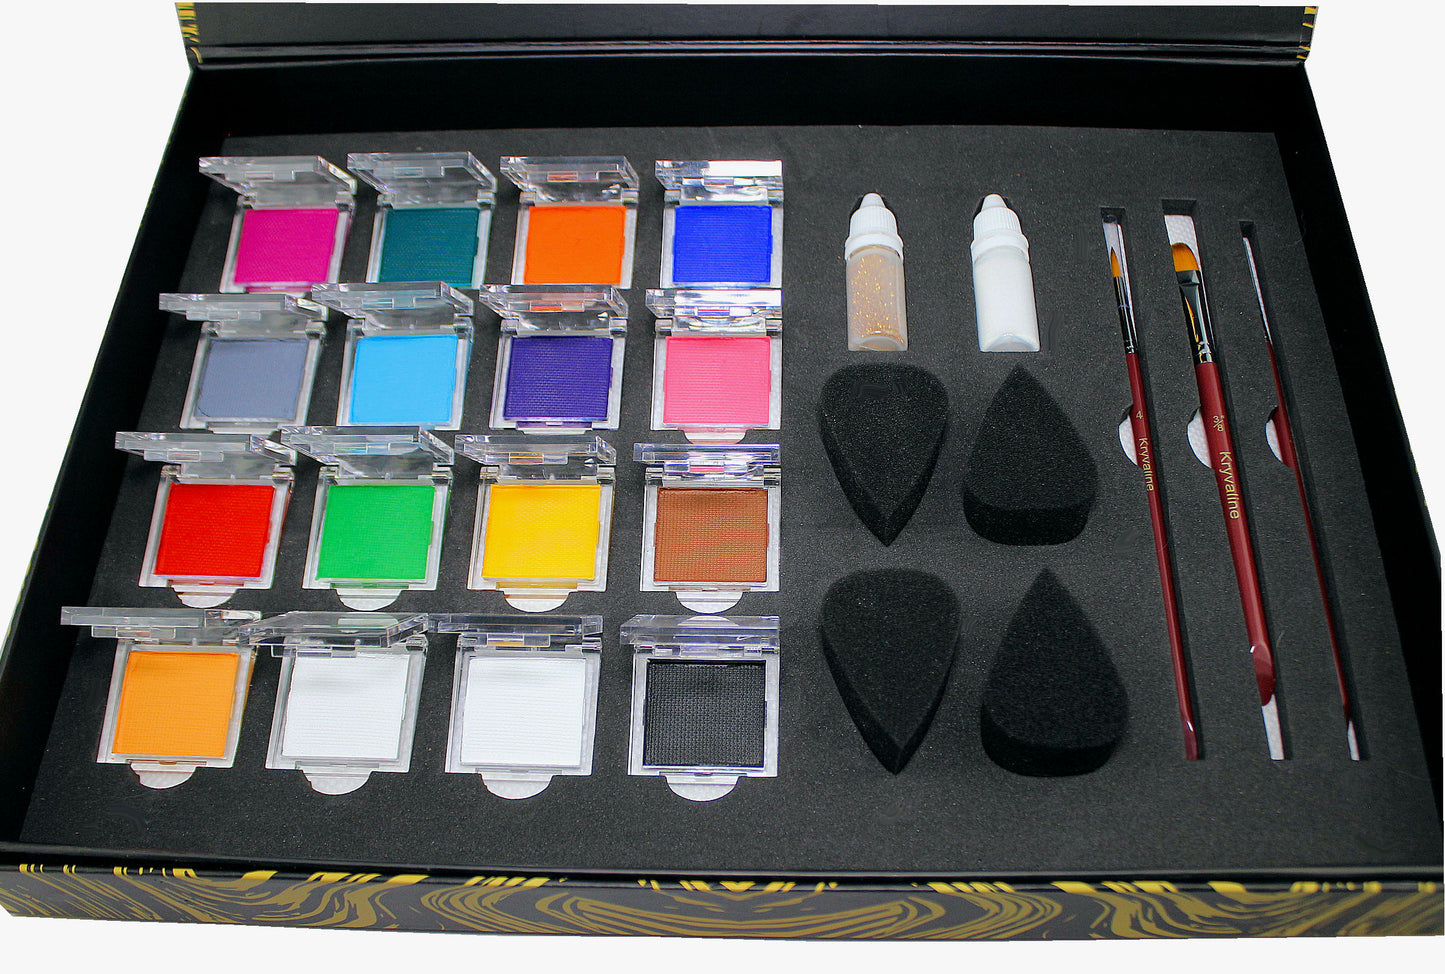 Muse Kit Matte Colors with 10g each color, brushes and glitters - Kryvaline Body Art Makeup | Glitter Tattoos, Face & Body Paint, Design - Kryvaline Body Art Makeup